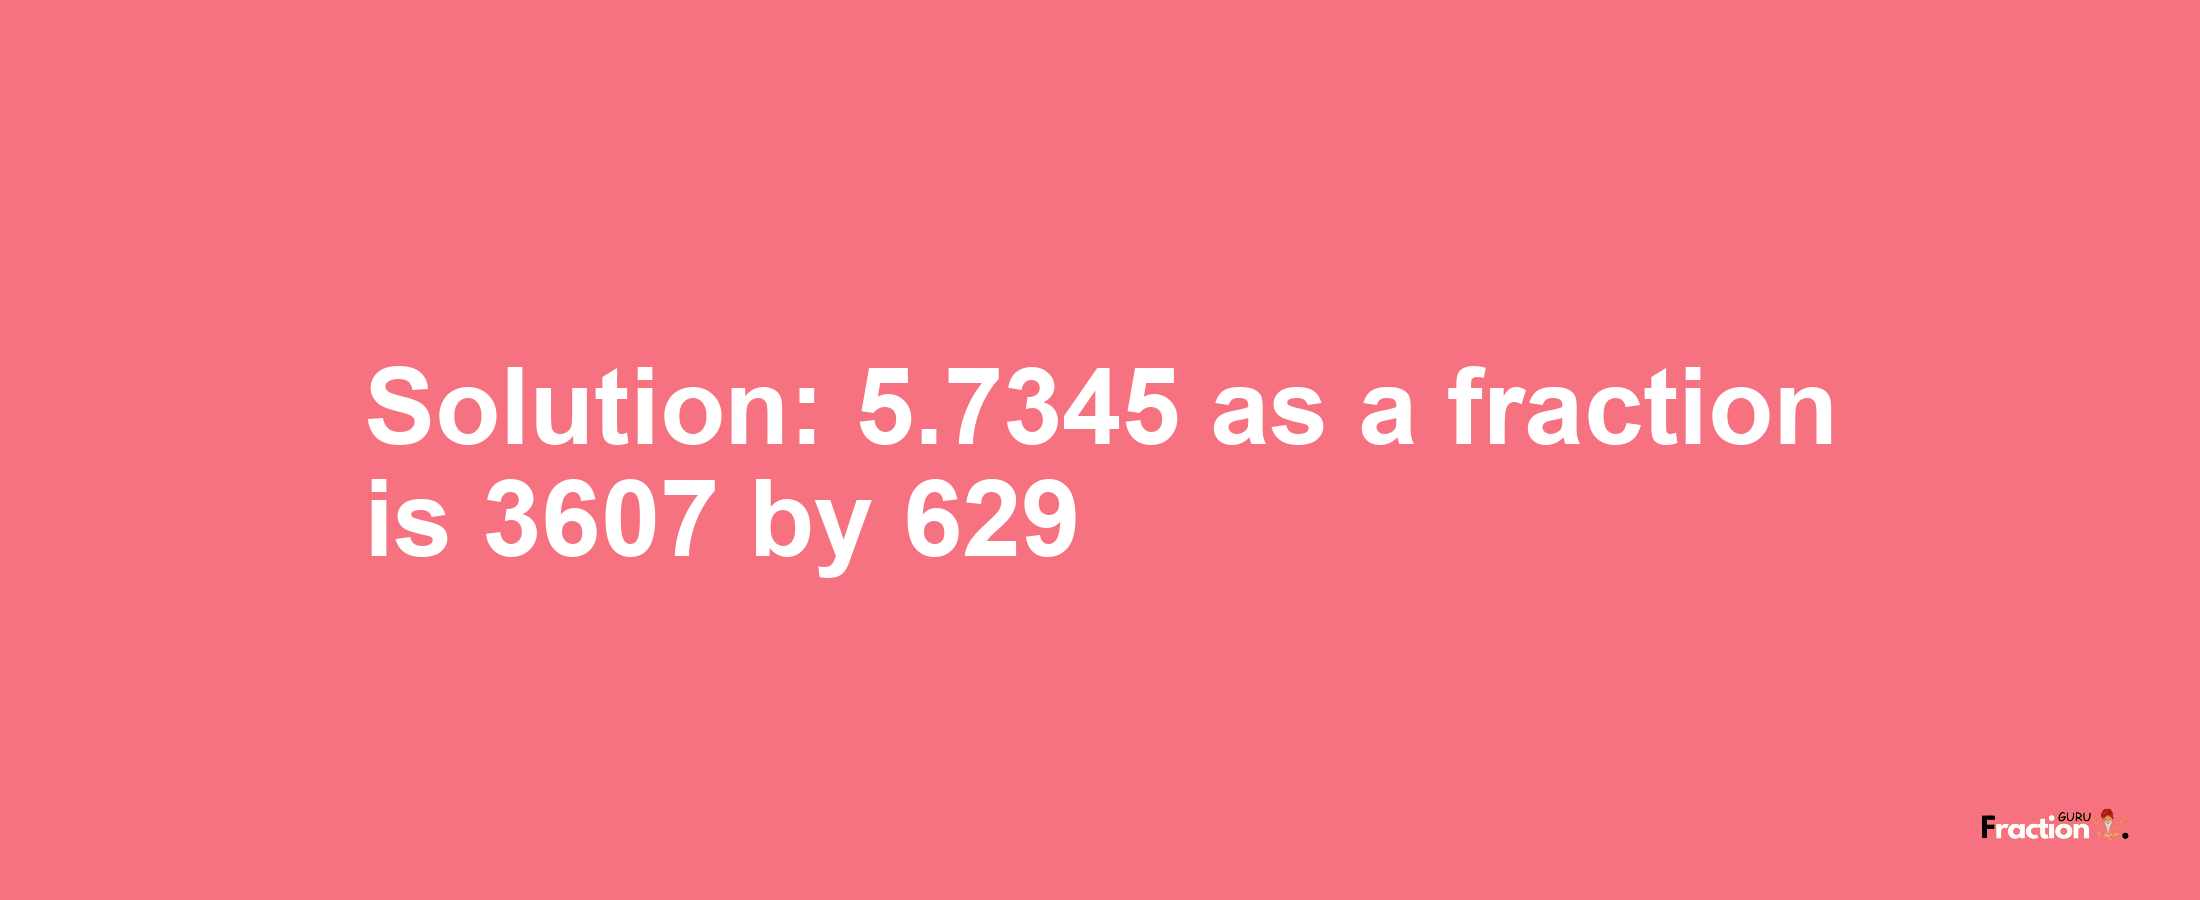 Solution:5.7345 as a fraction is 3607/629